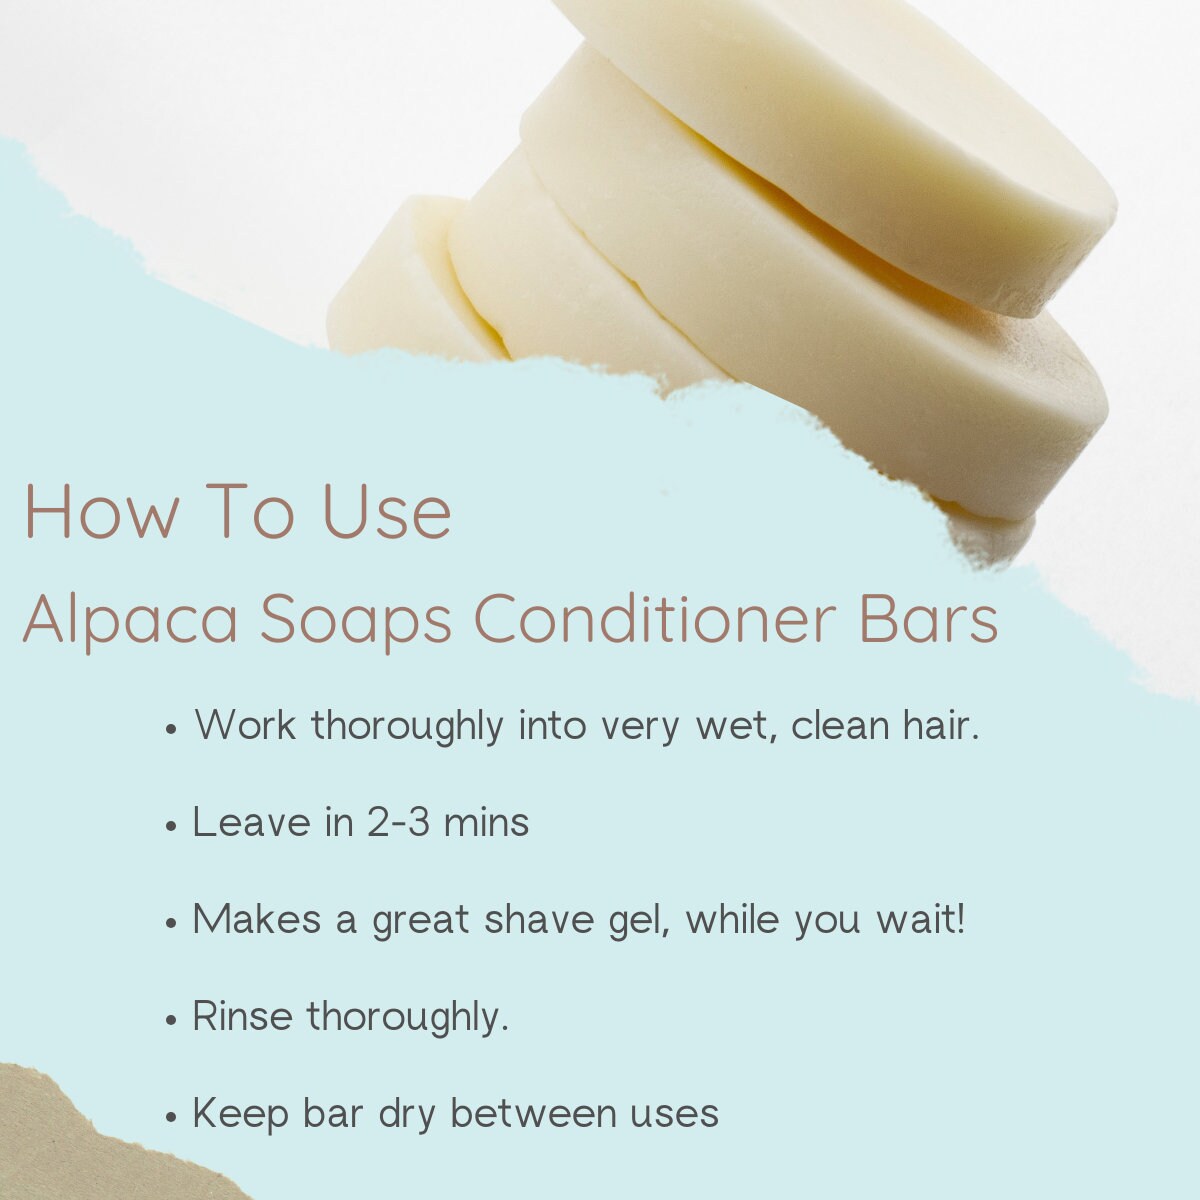 how to use apaca soaps conditioner bars